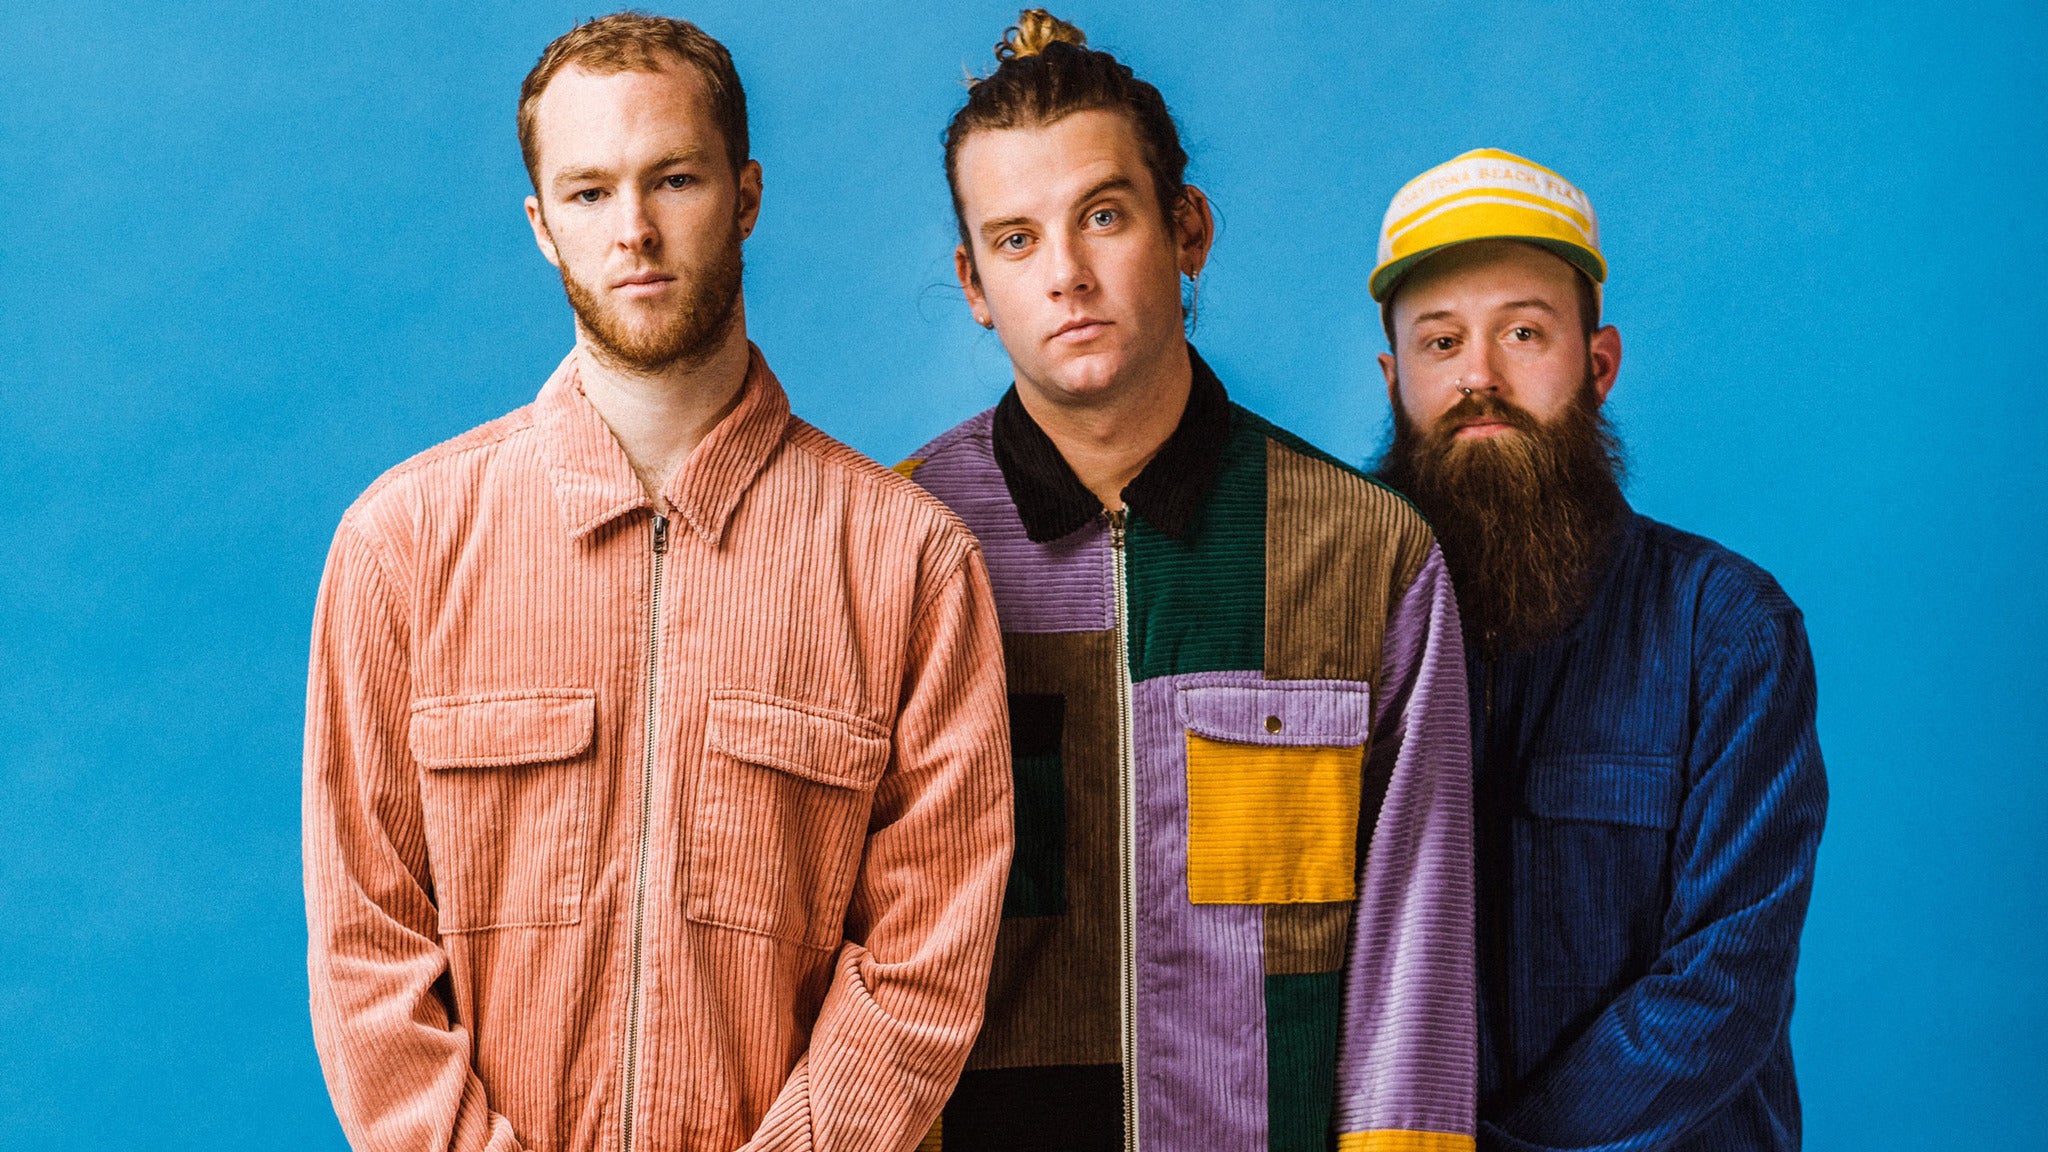 Judah & the Lion - Going to Mars Tour in New York promo photo for Fan Club presale offer code